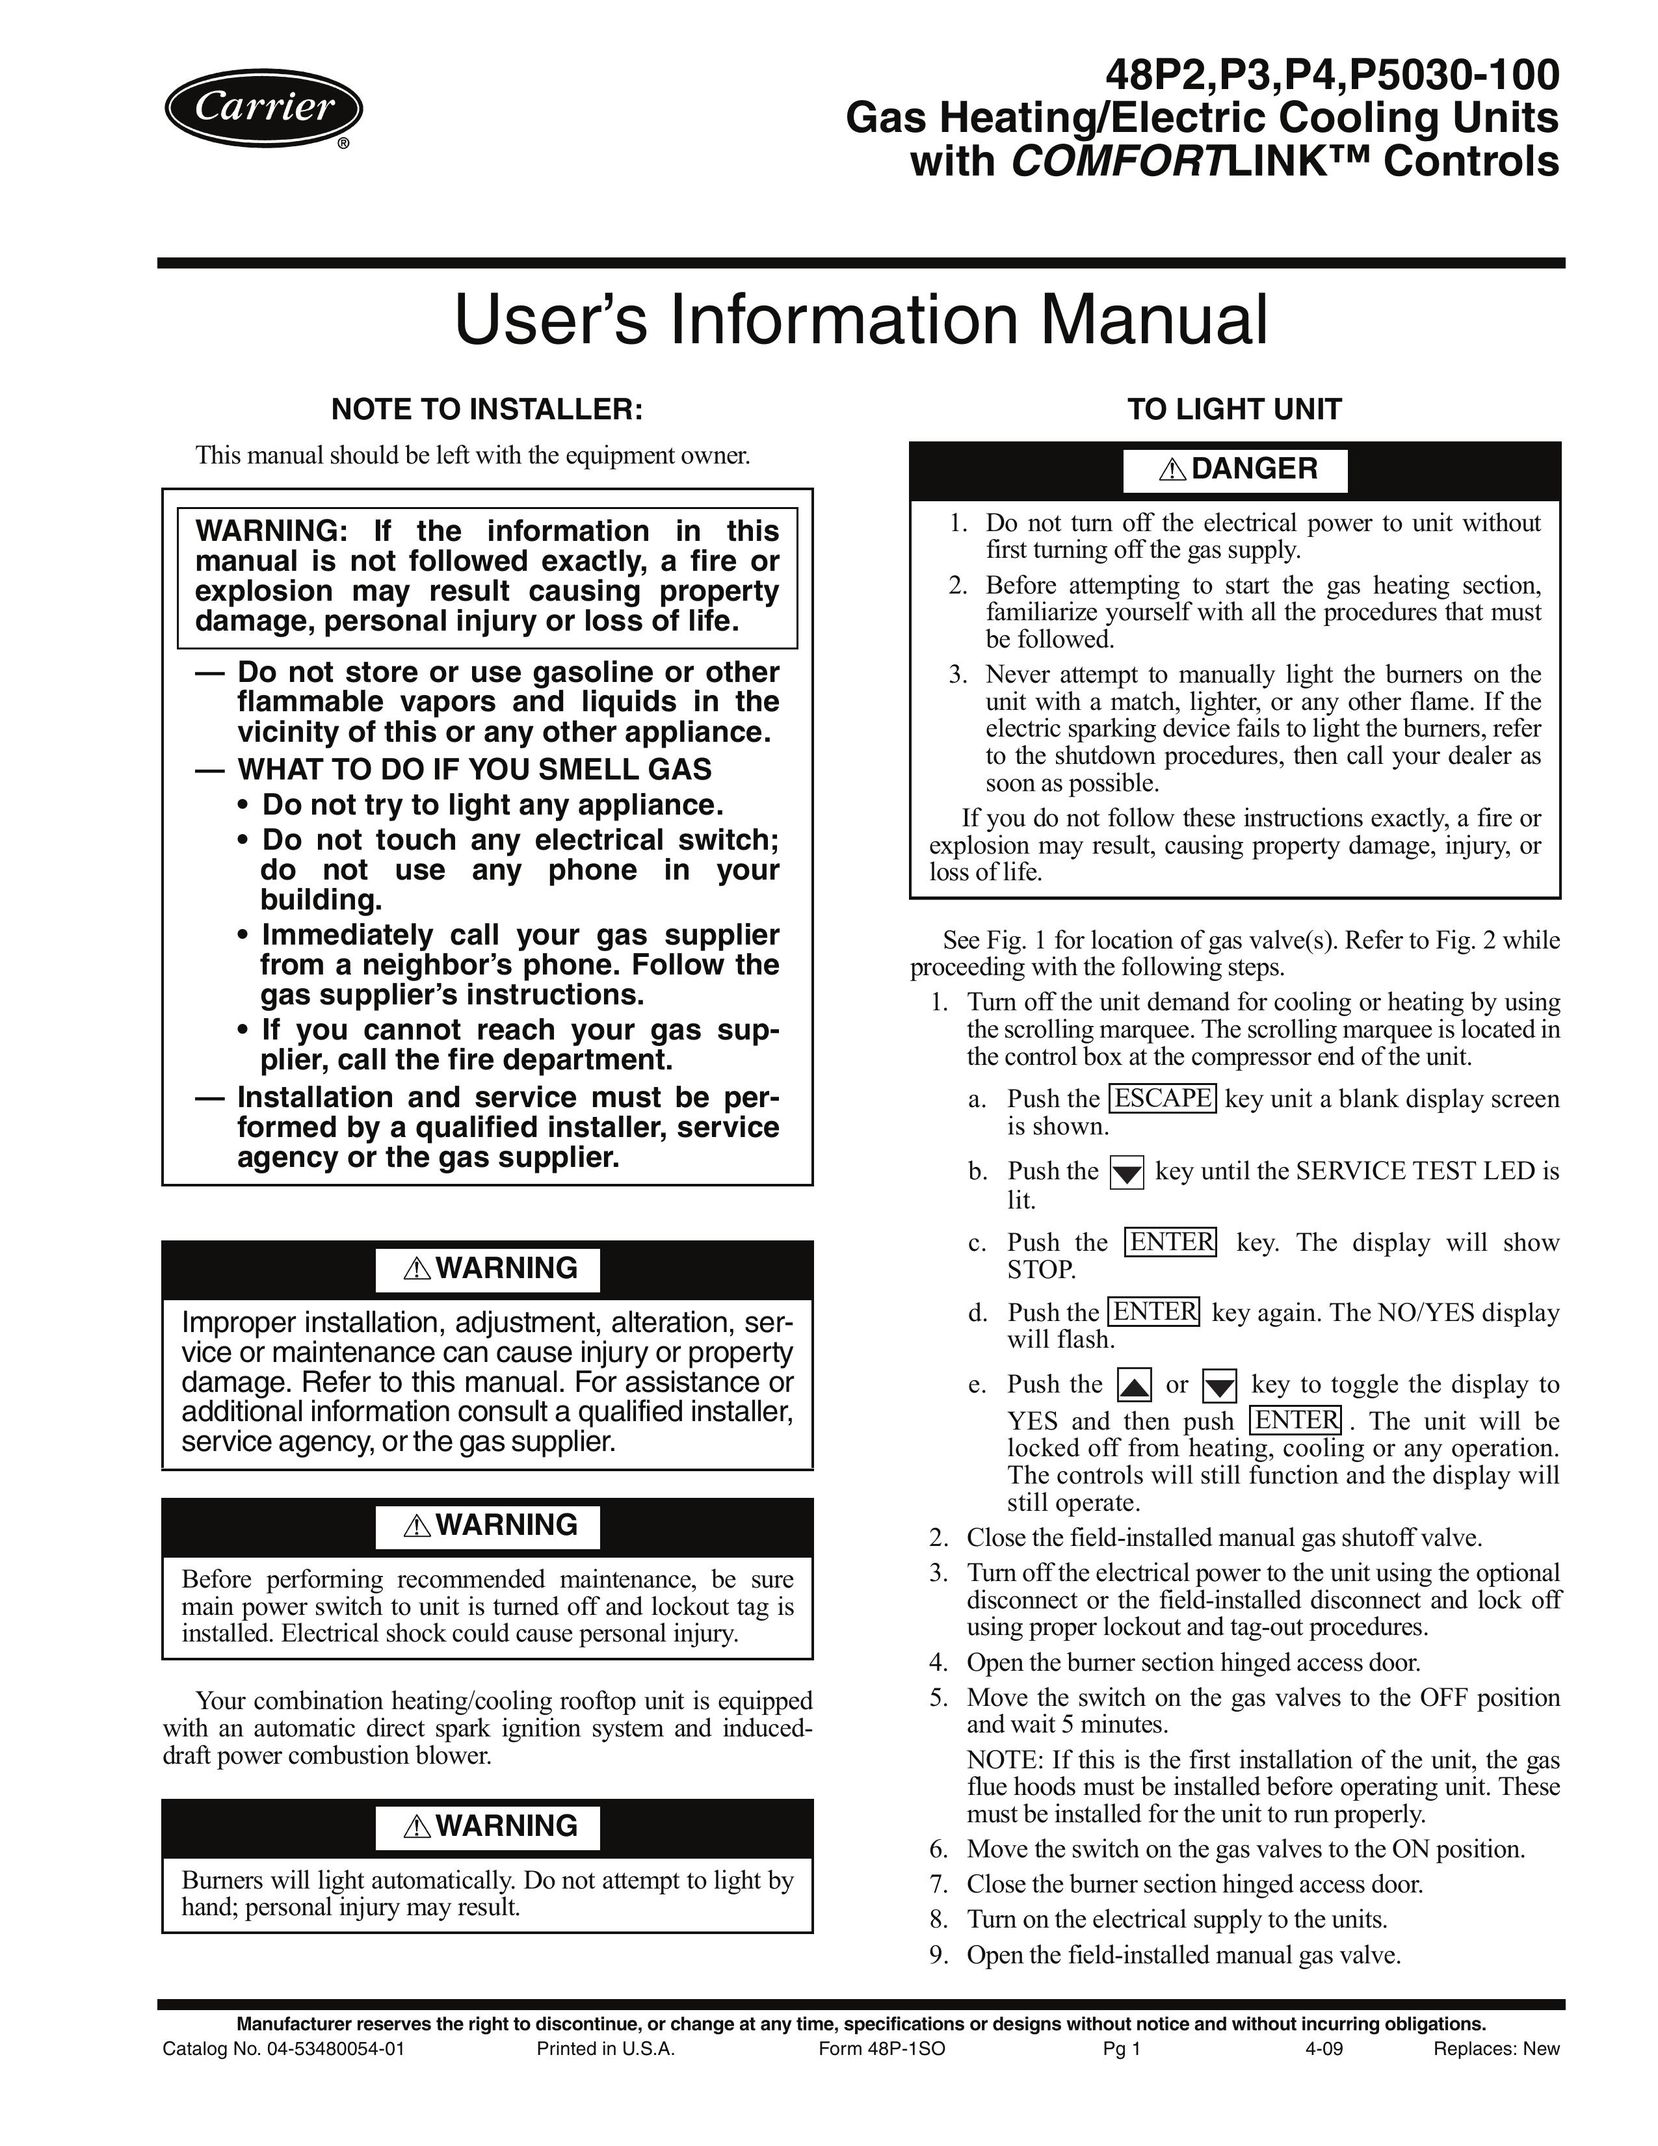 Carrier 48P2 Gas Heater User Manual